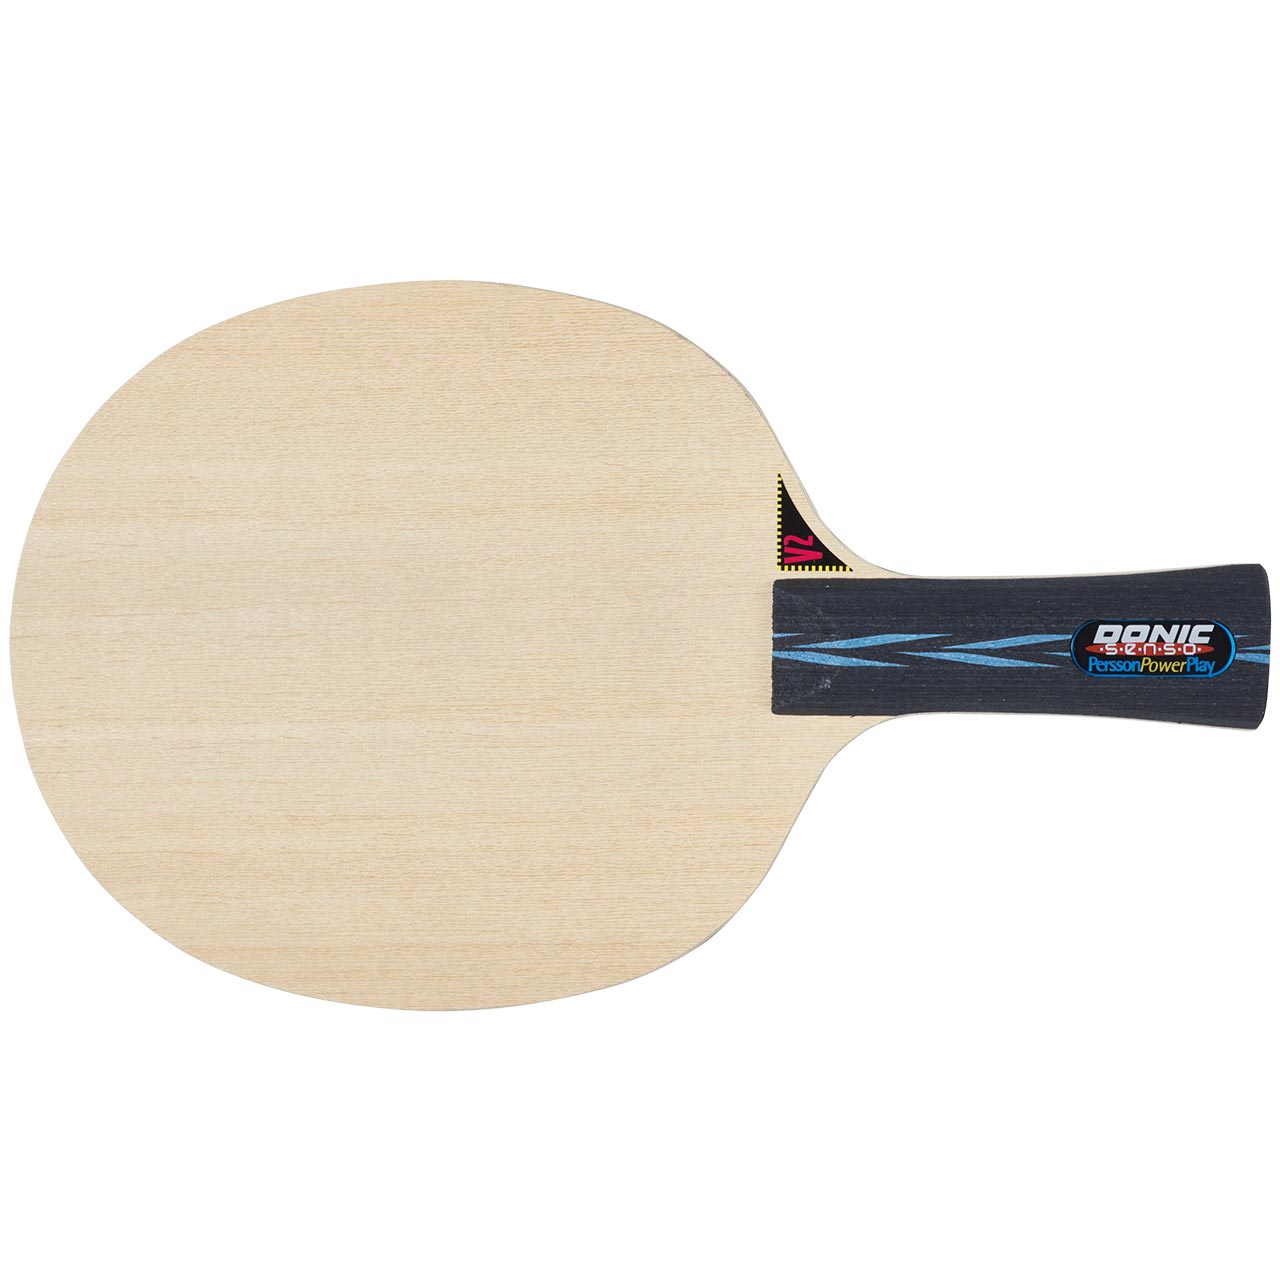 Tischtennis Holz DONIC Persson Powerplay Senso V2 02